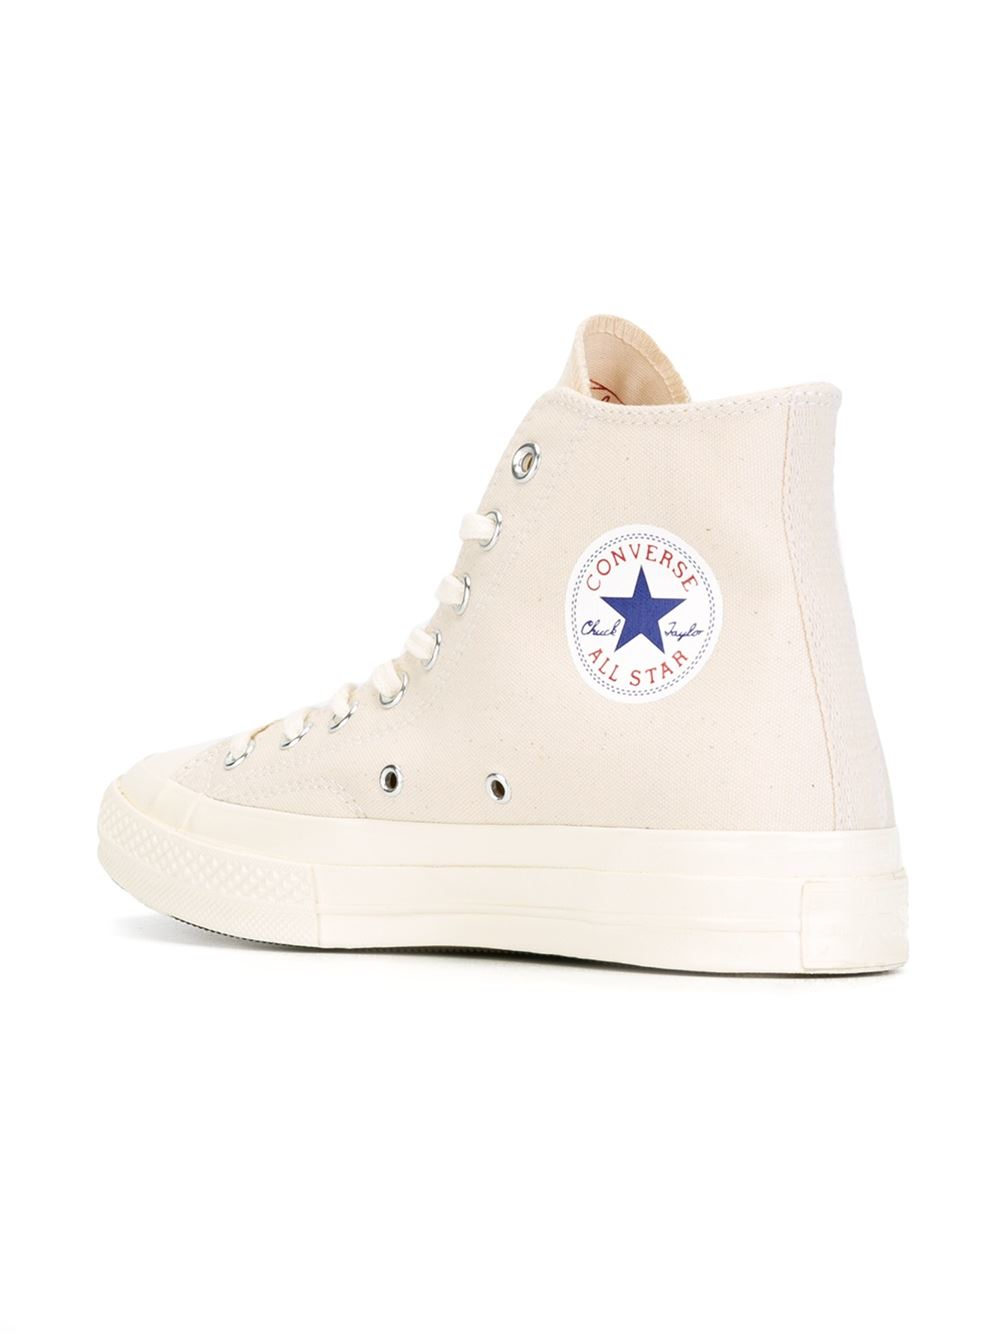 Converse 'chuck Taylor All Star' Hi-top Sneakers in Beige (NUDE ...